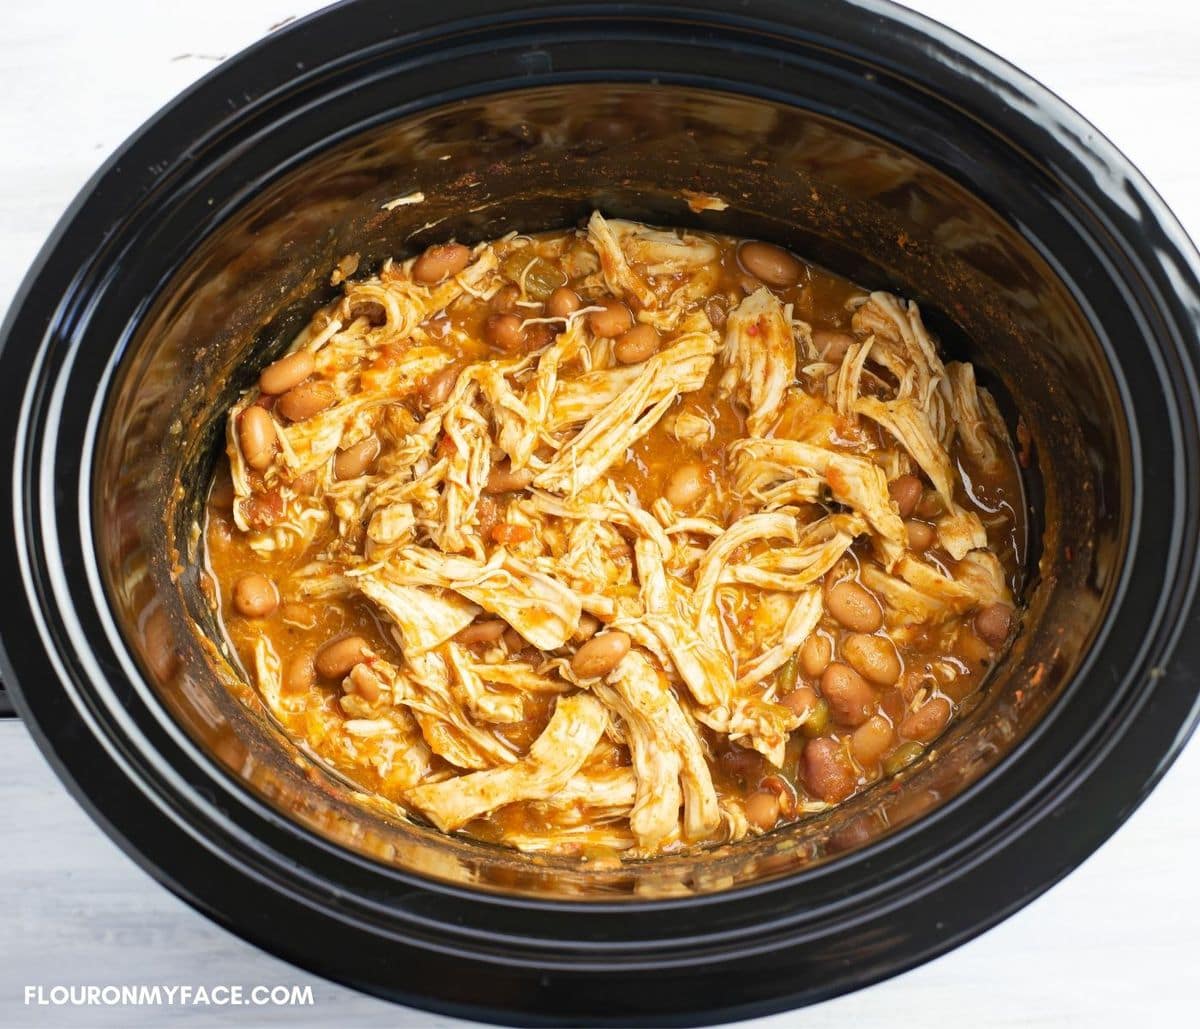 Shredded chicken covered in burrito sauce inside a crock pot.